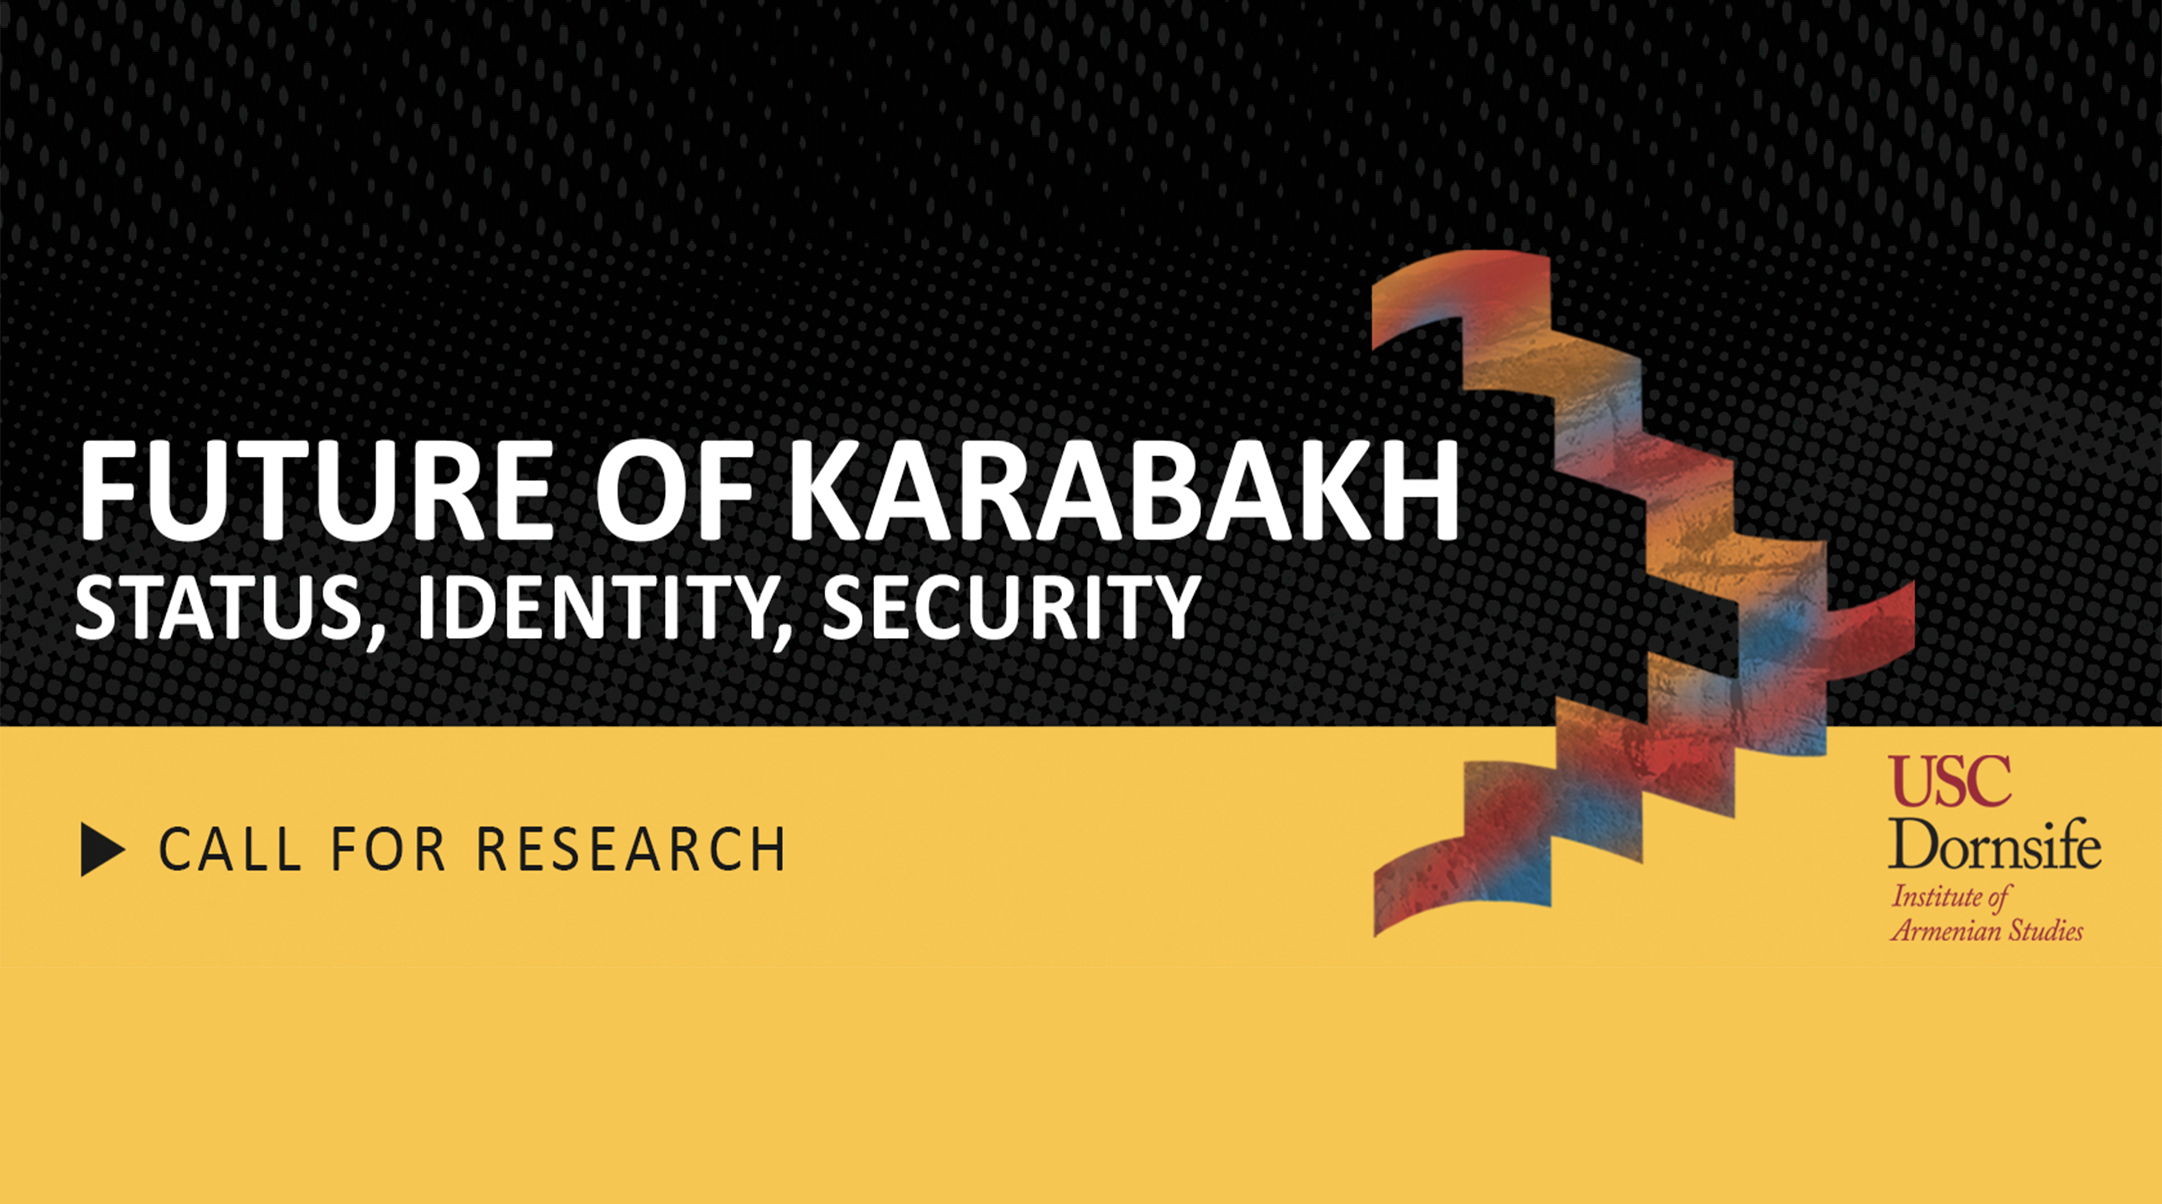 USC Institute of Armenian Studies - Future of Karabakh, Status, Identity, and Security - Call for Research